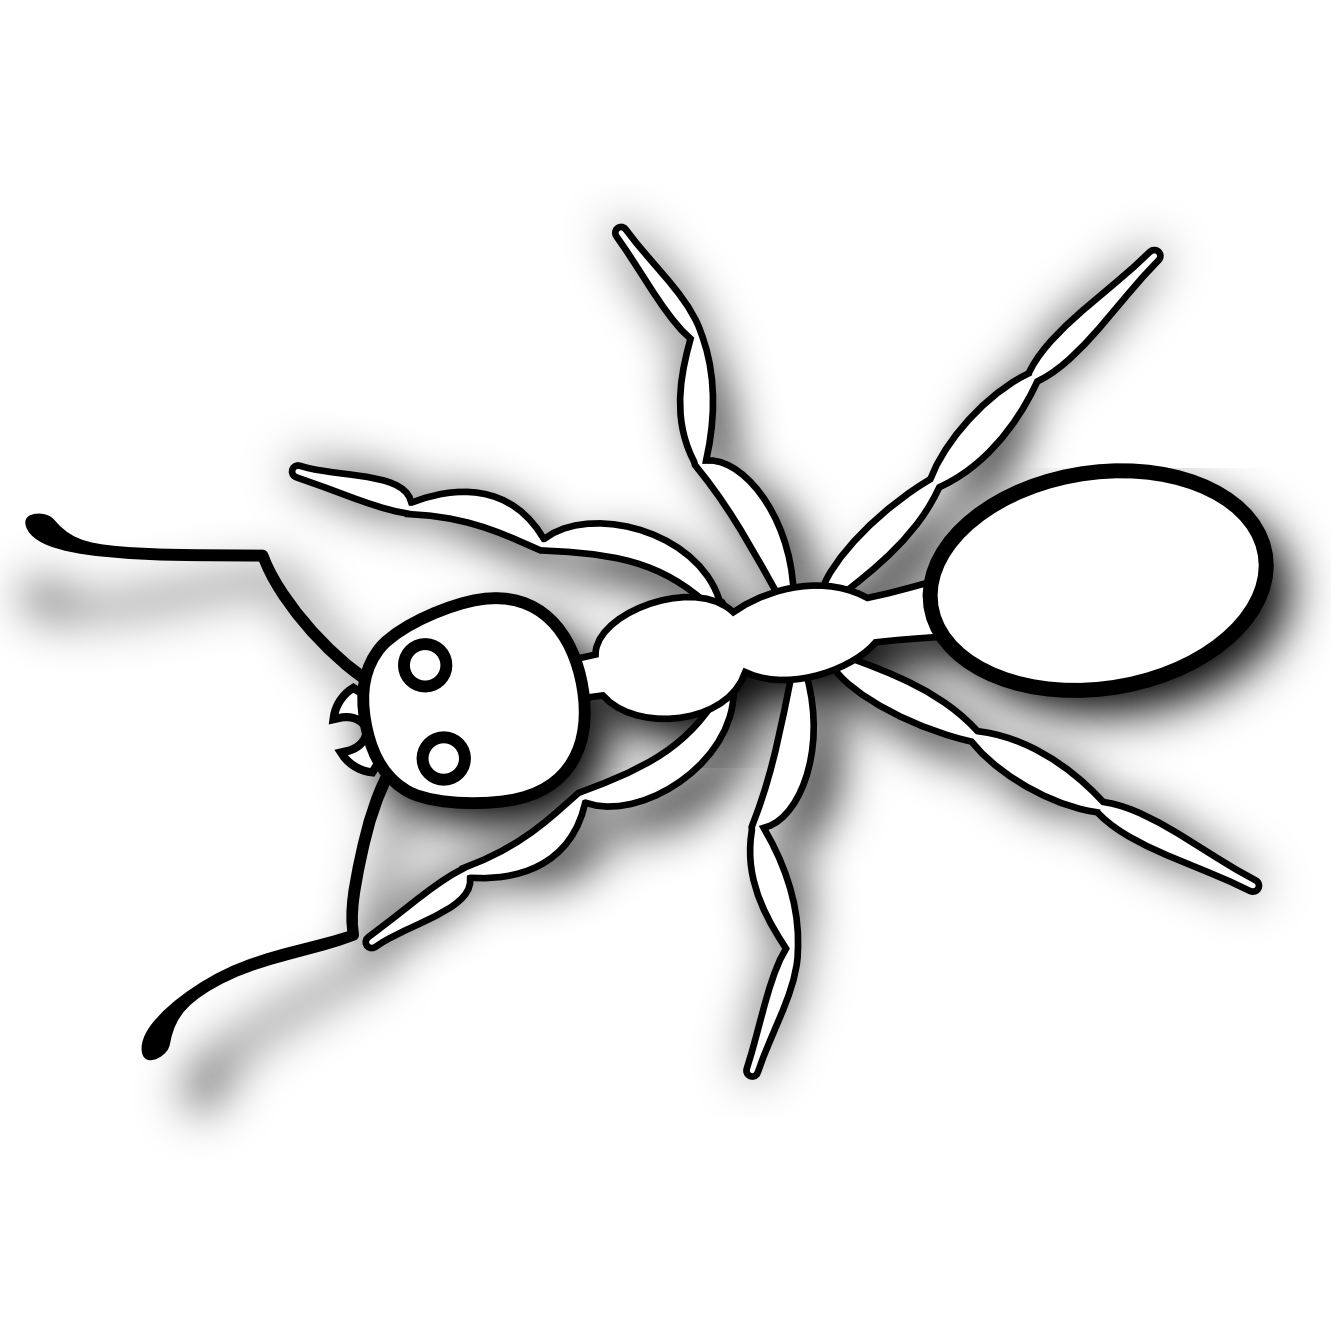 Ants clipart gray. Ant black and white